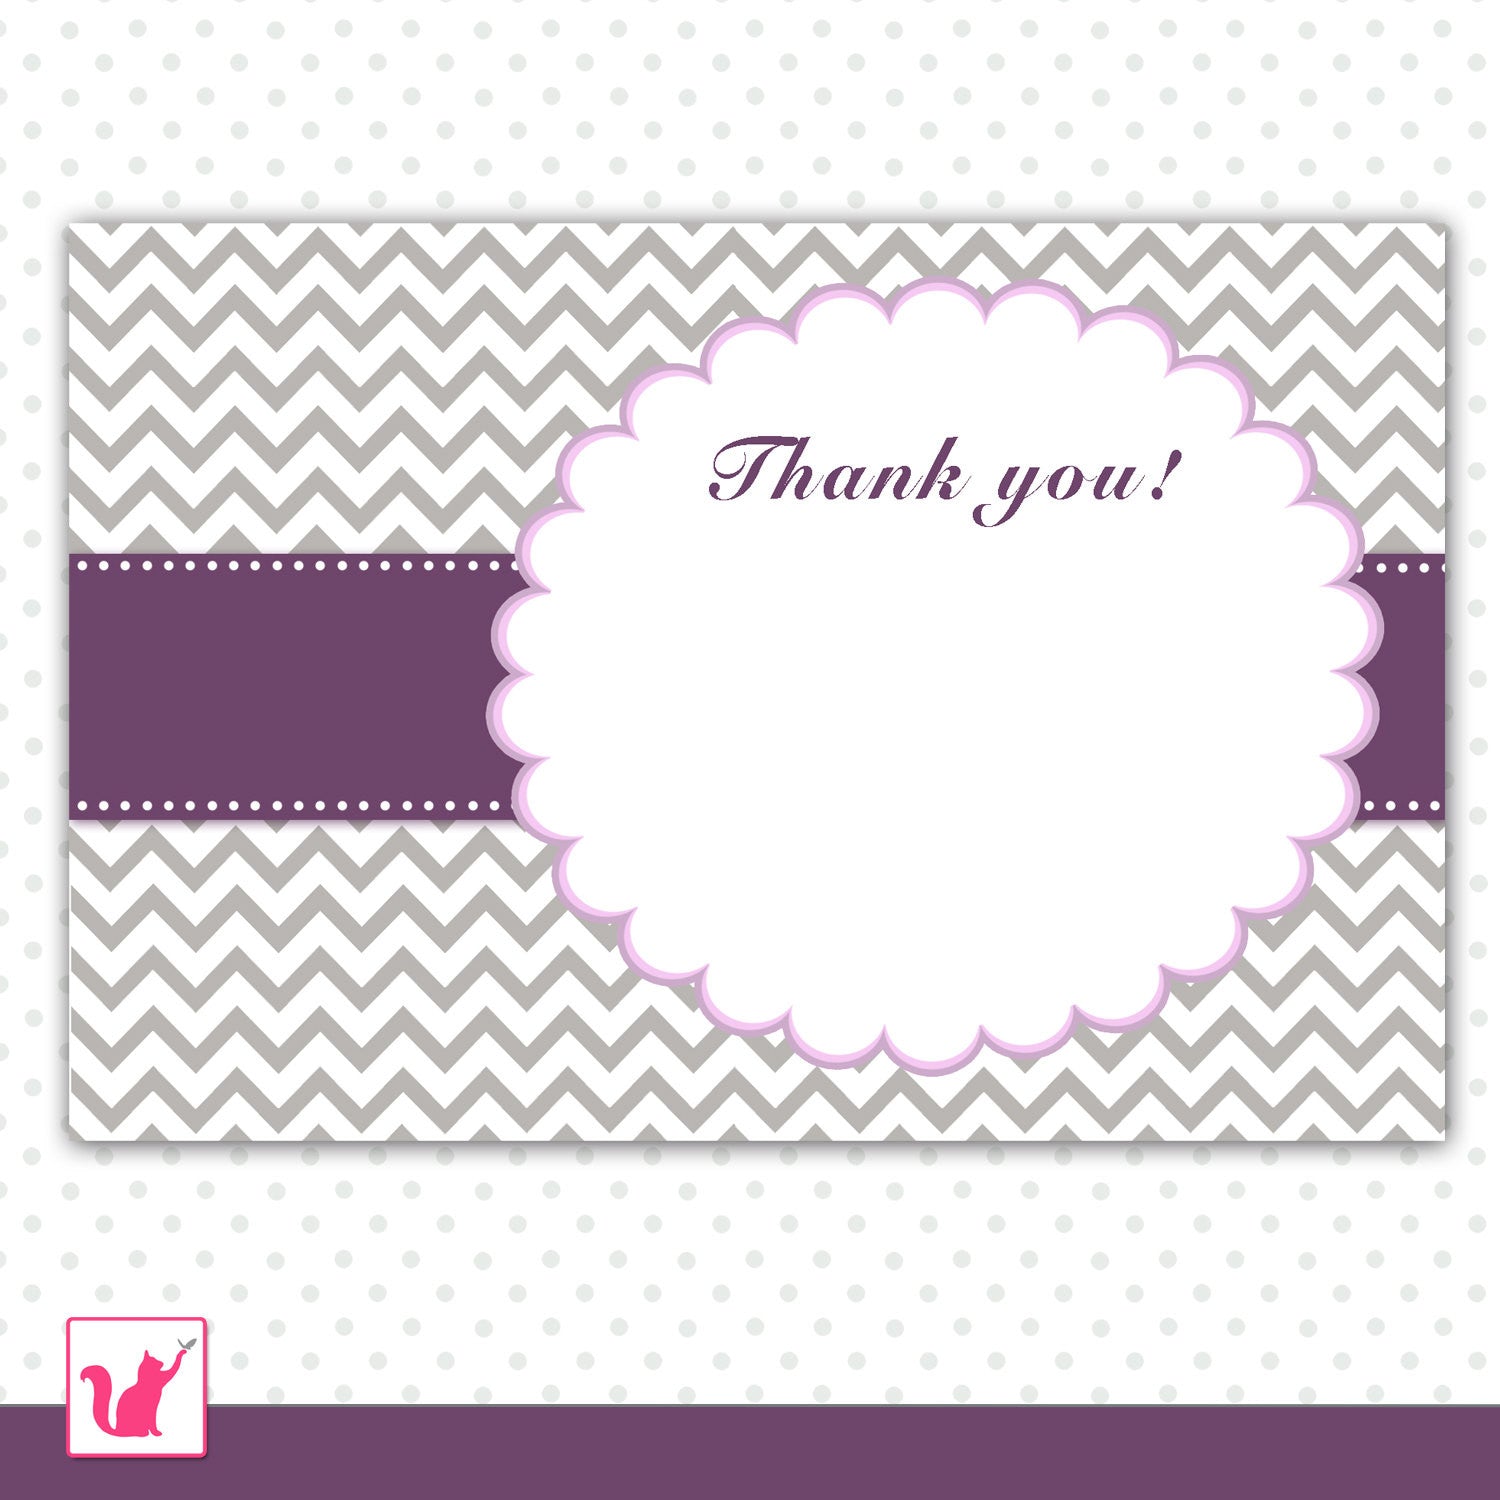 INSTANT DOWNLOAD Gray Chevron Purple Blank Party Thank You Card Note - Zig Zag Birthday Party Favors Baby Shower Favors Party Items